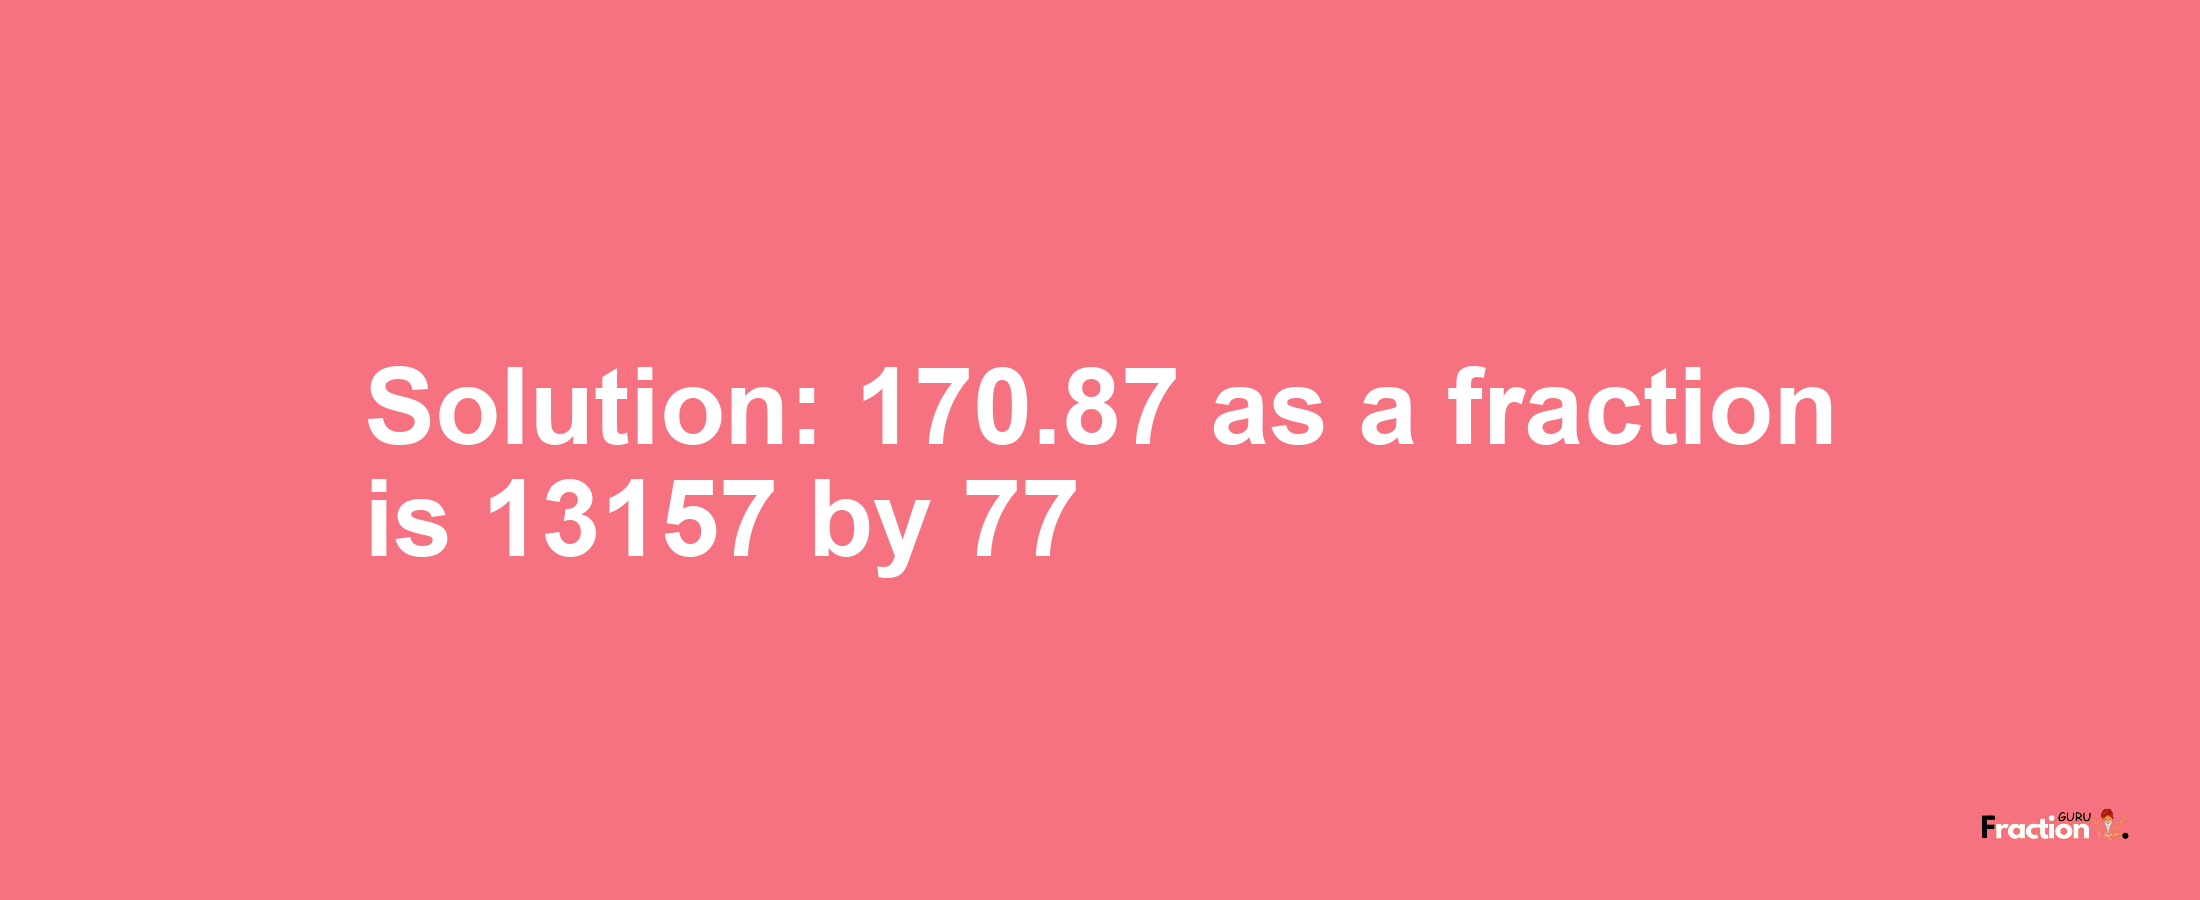 Solution:170.87 as a fraction is 13157/77